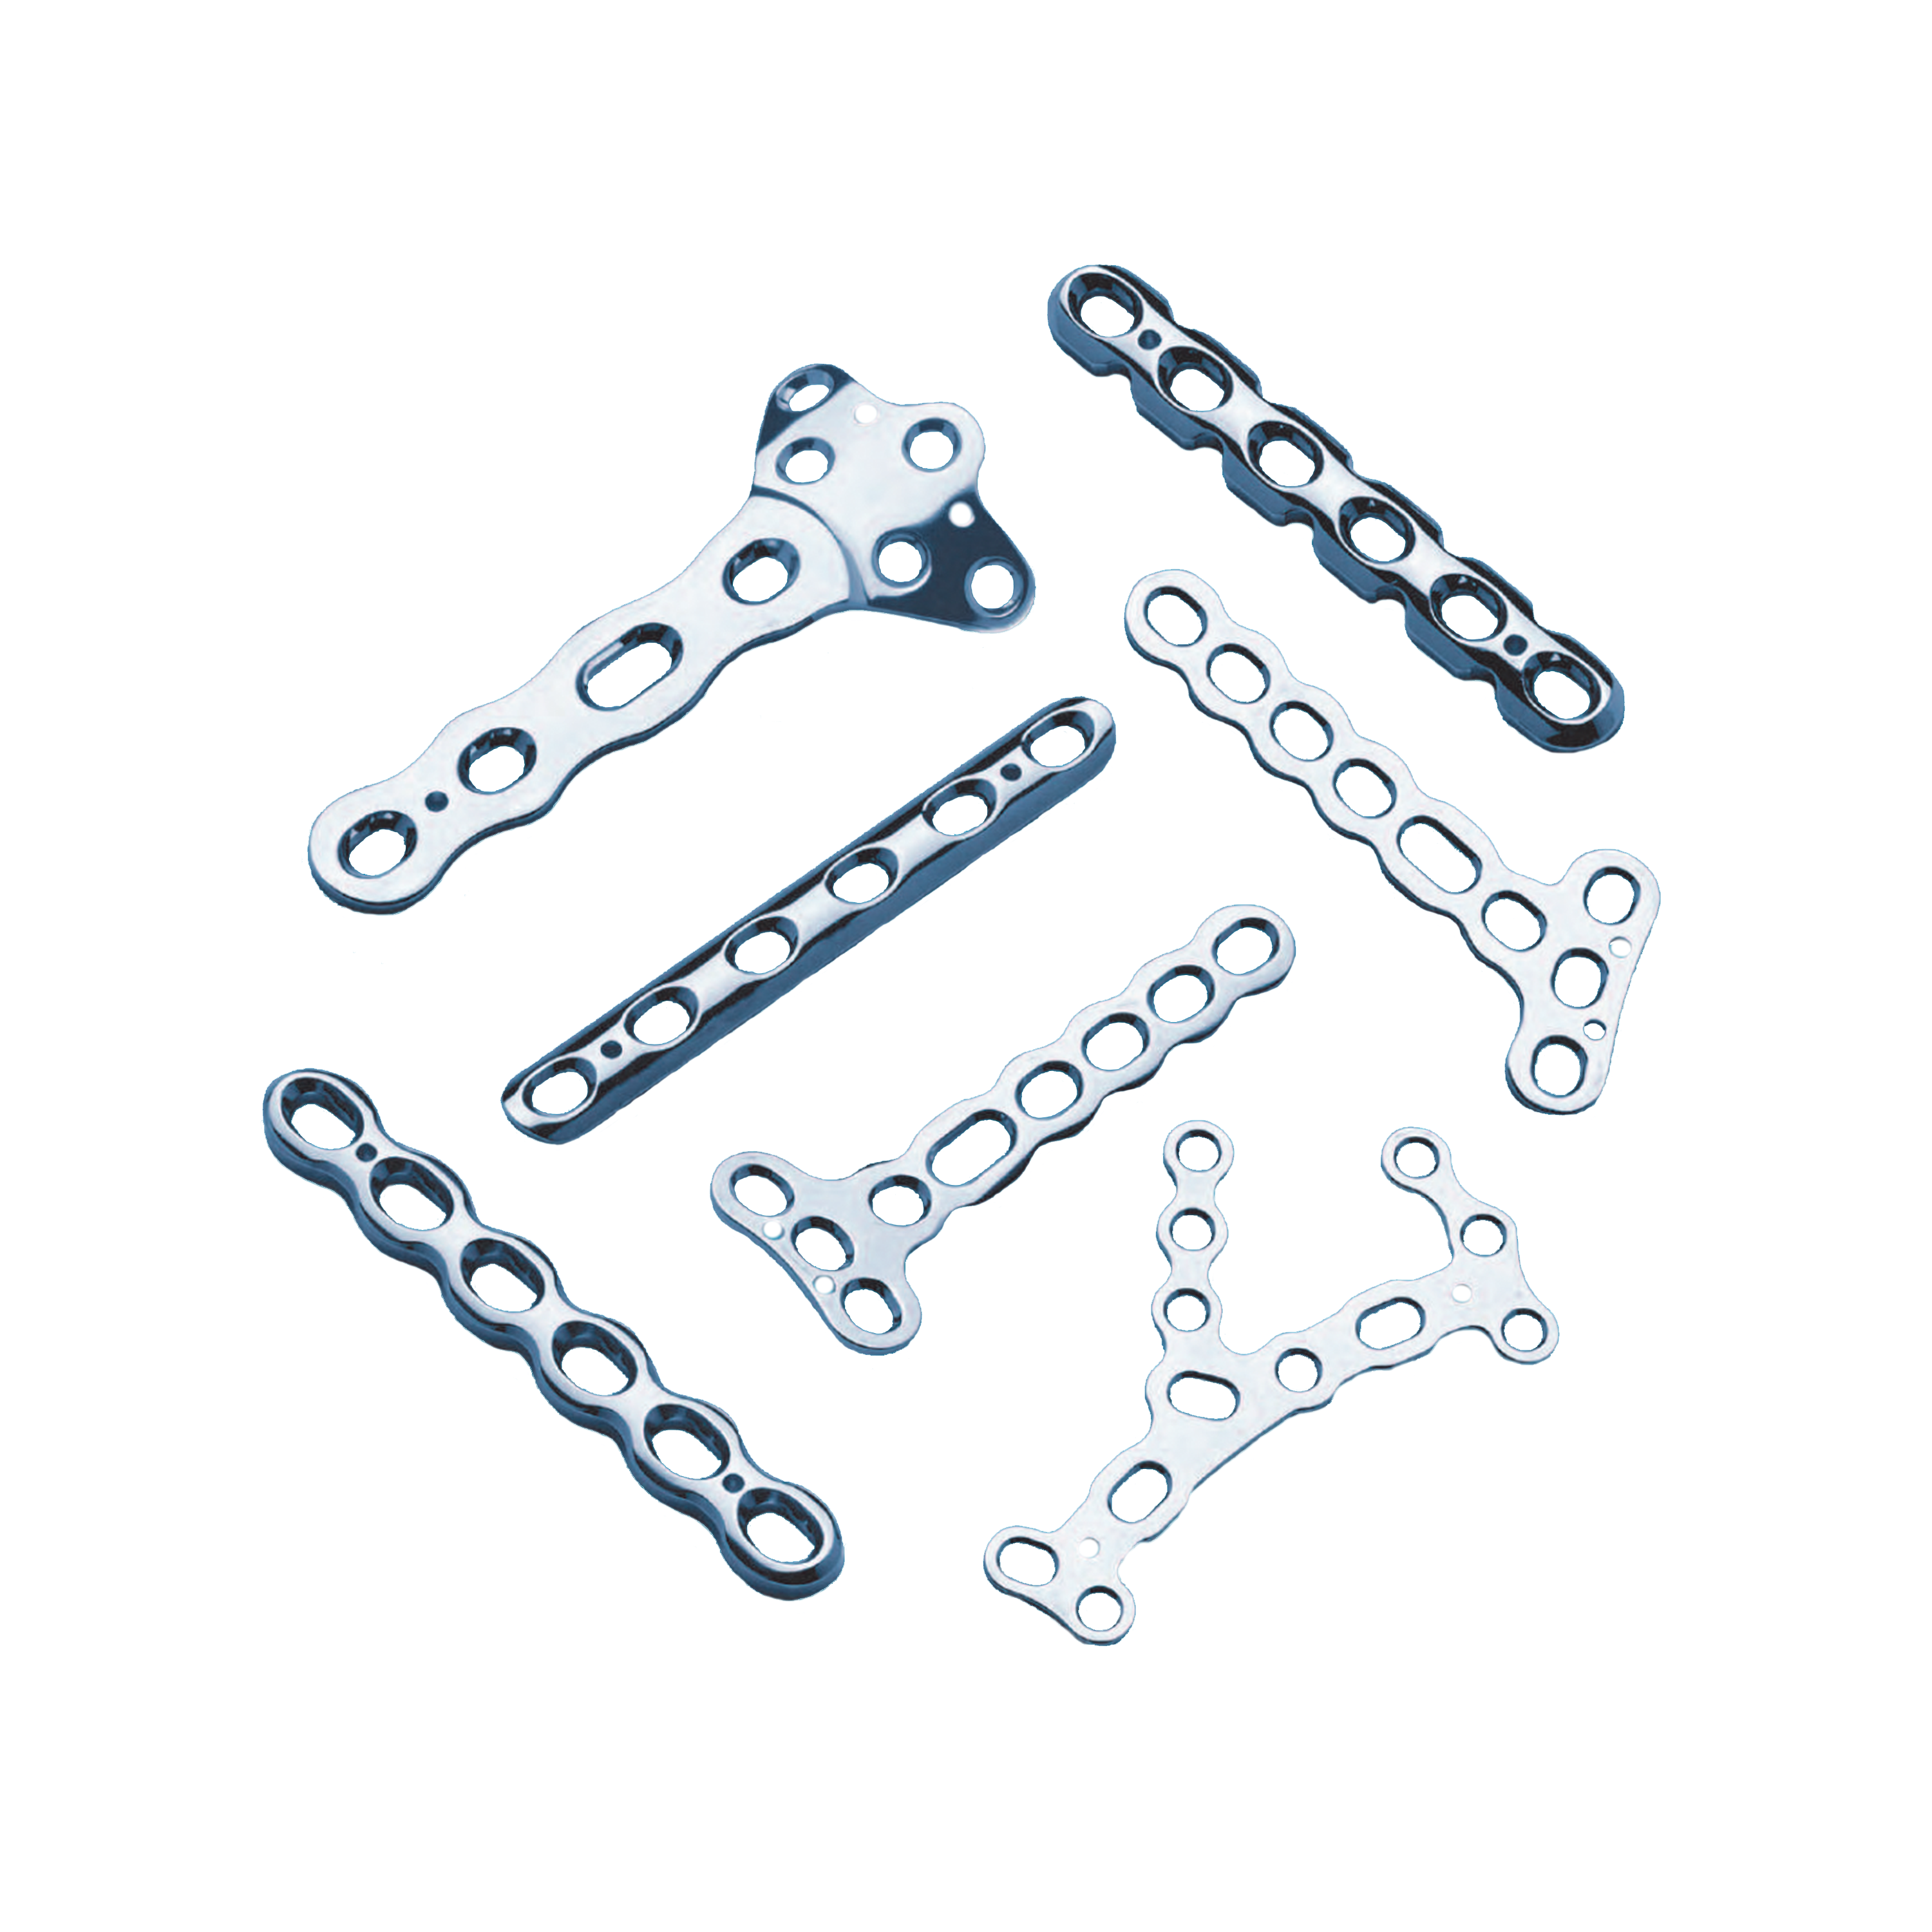 SPS Small Fragment (Stainless Steel & Titanium) | The newly developed Small Fragment Set is designed for the most common
indications of traumatology and orthopaedics.